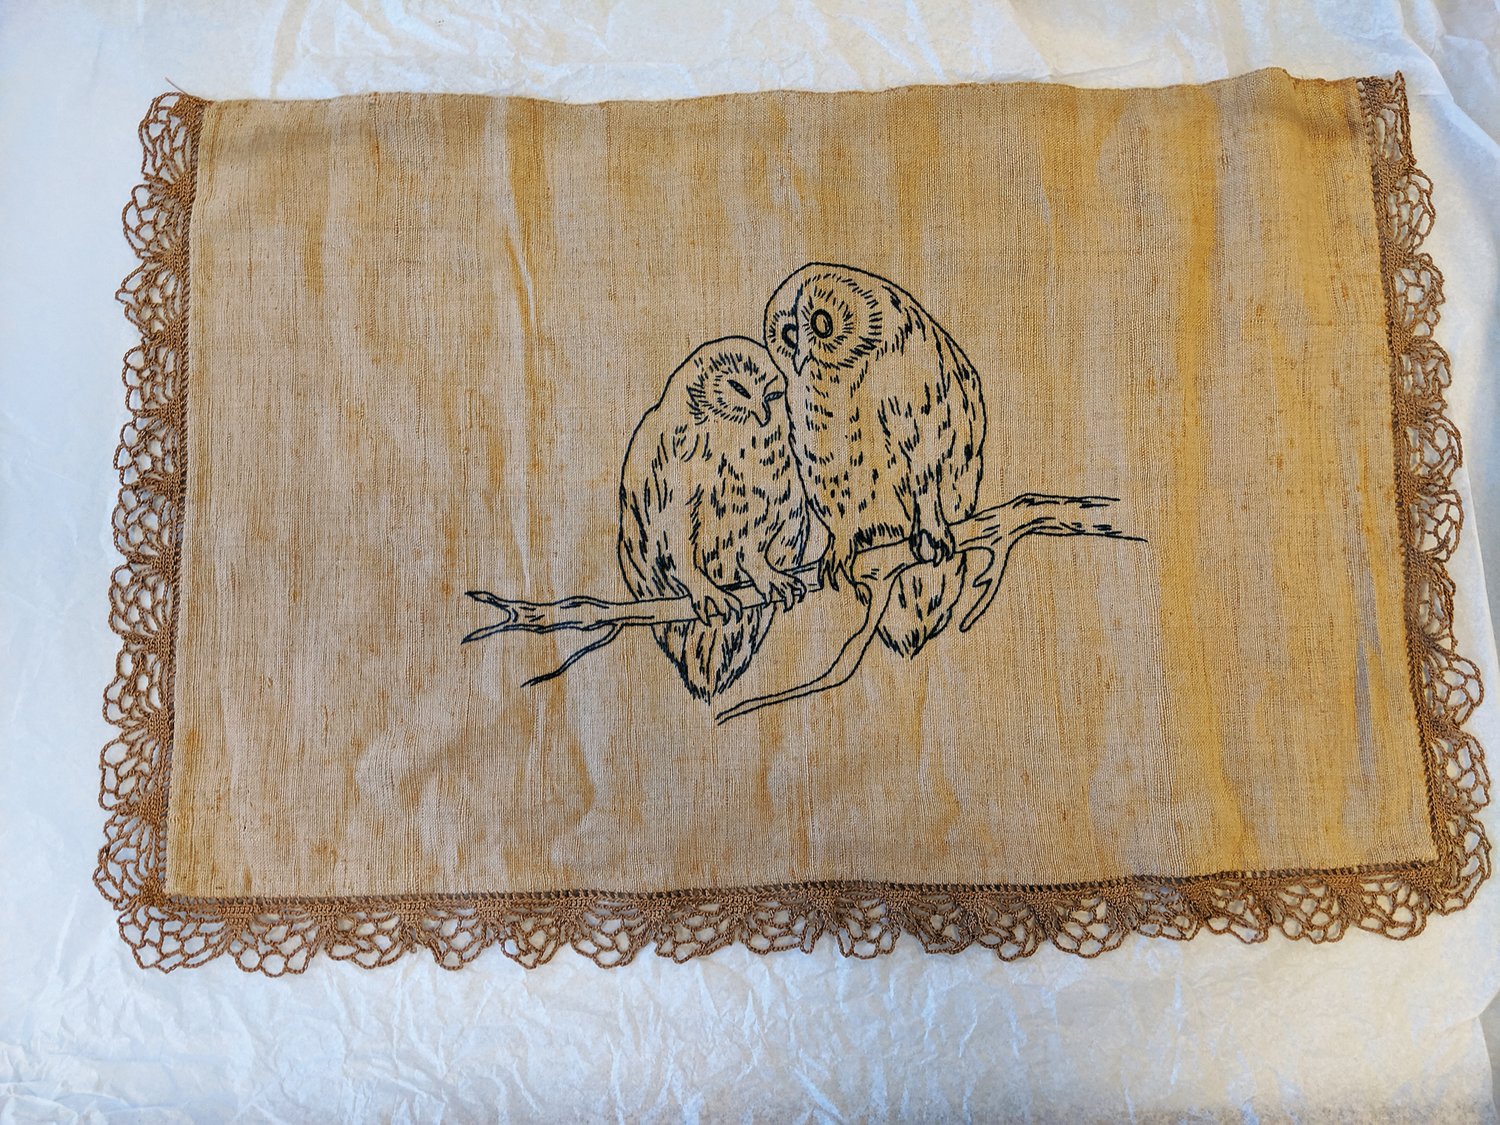 The Victorian linen “splasher” (hand towel) made for Ashbel Russell Welch by his mother.